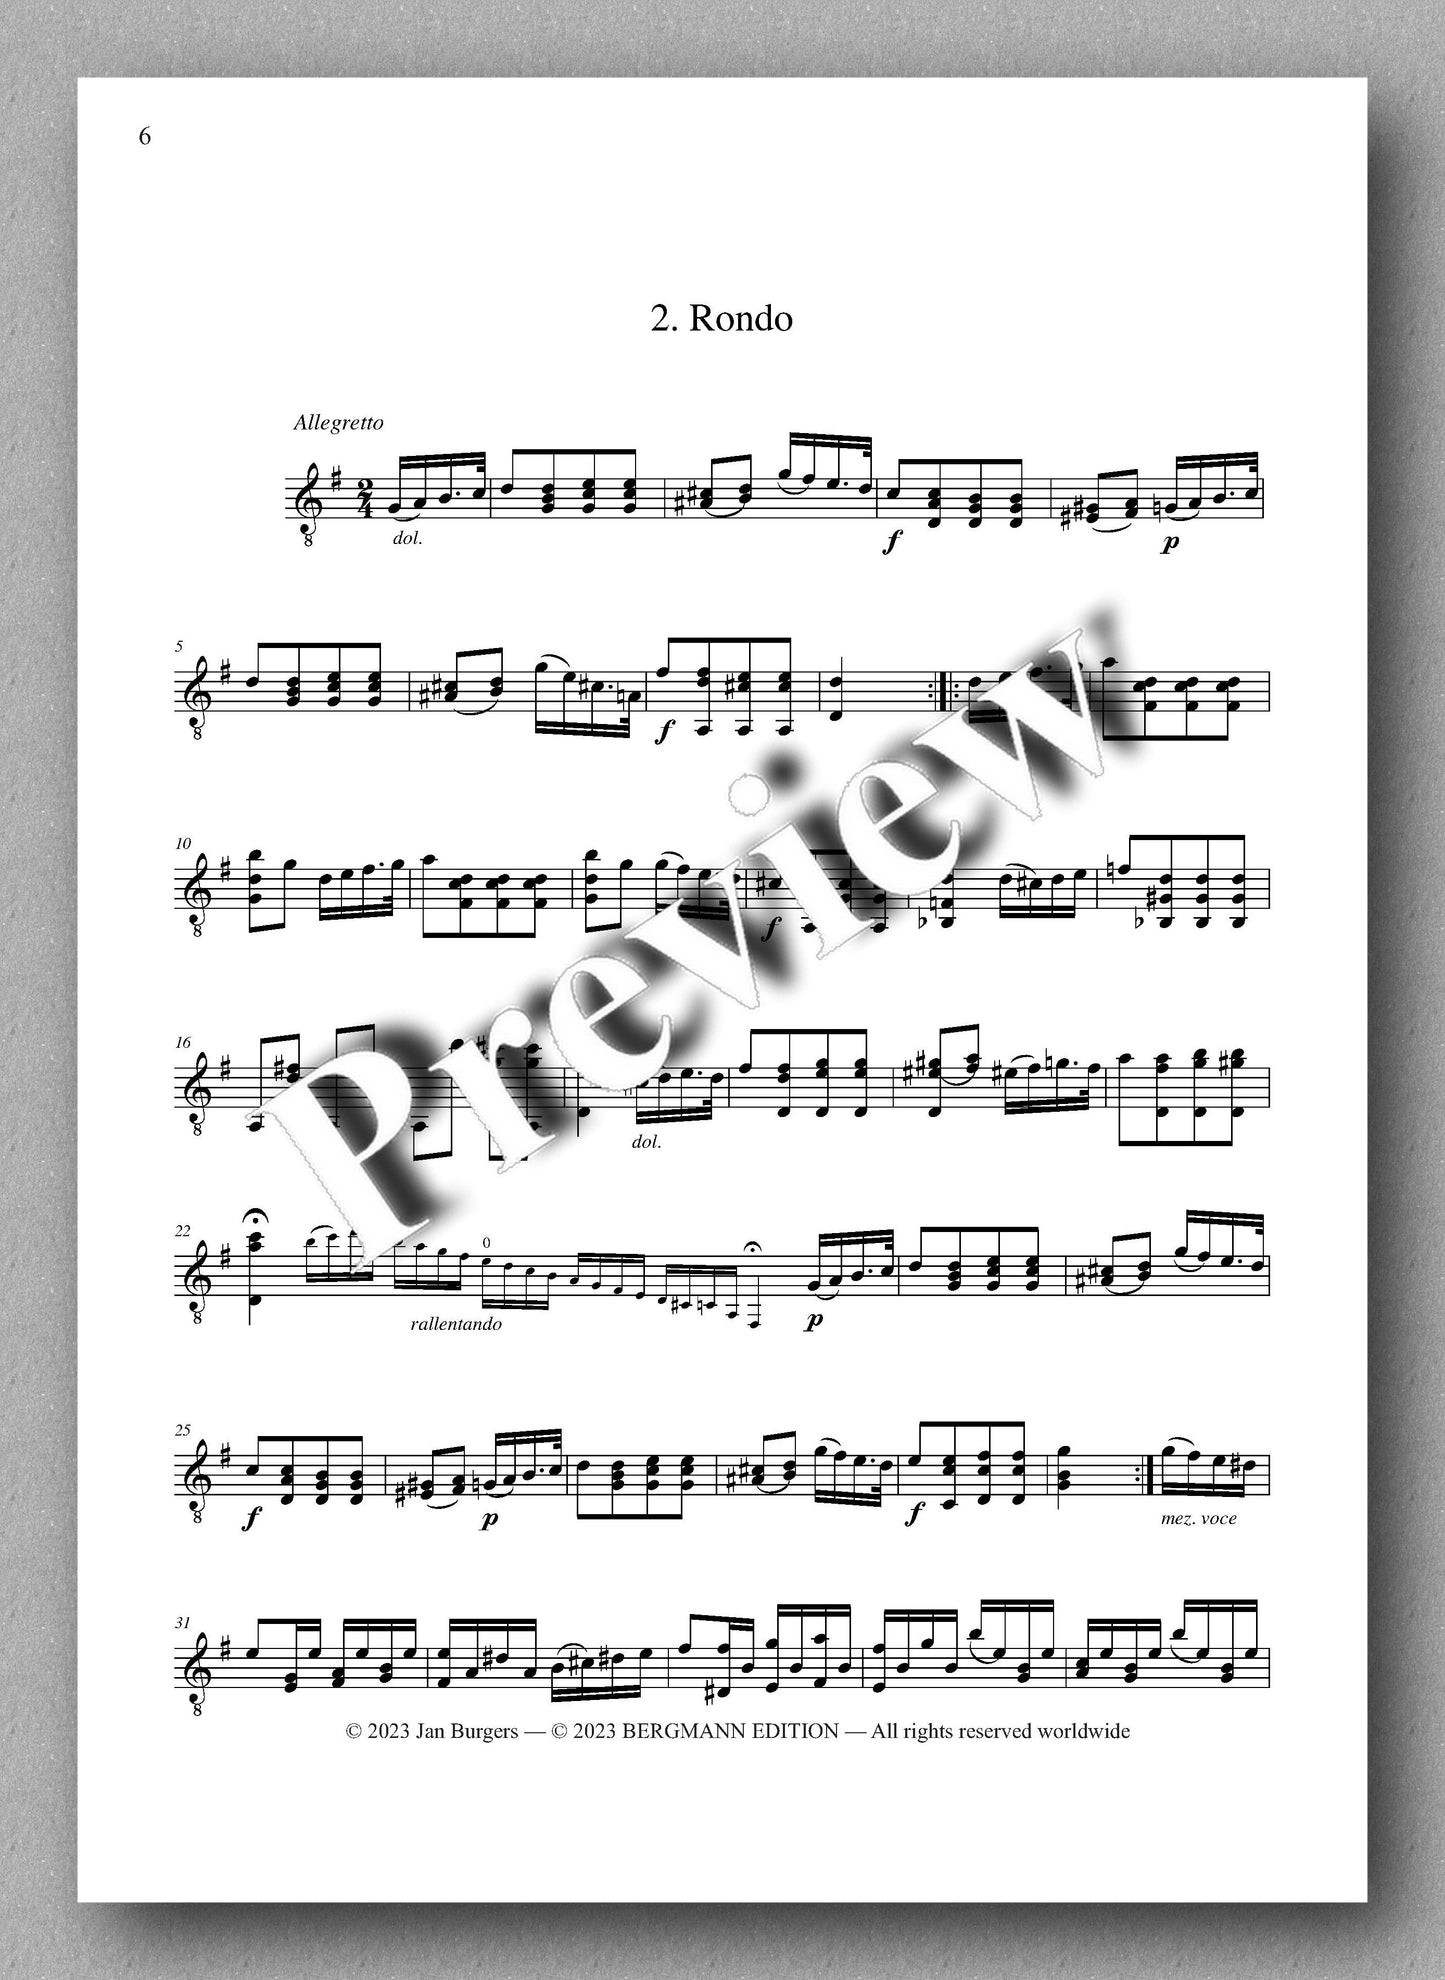 Molino, Collected Works for Guitar Solo, Vol. 6 - preview of the music score 2